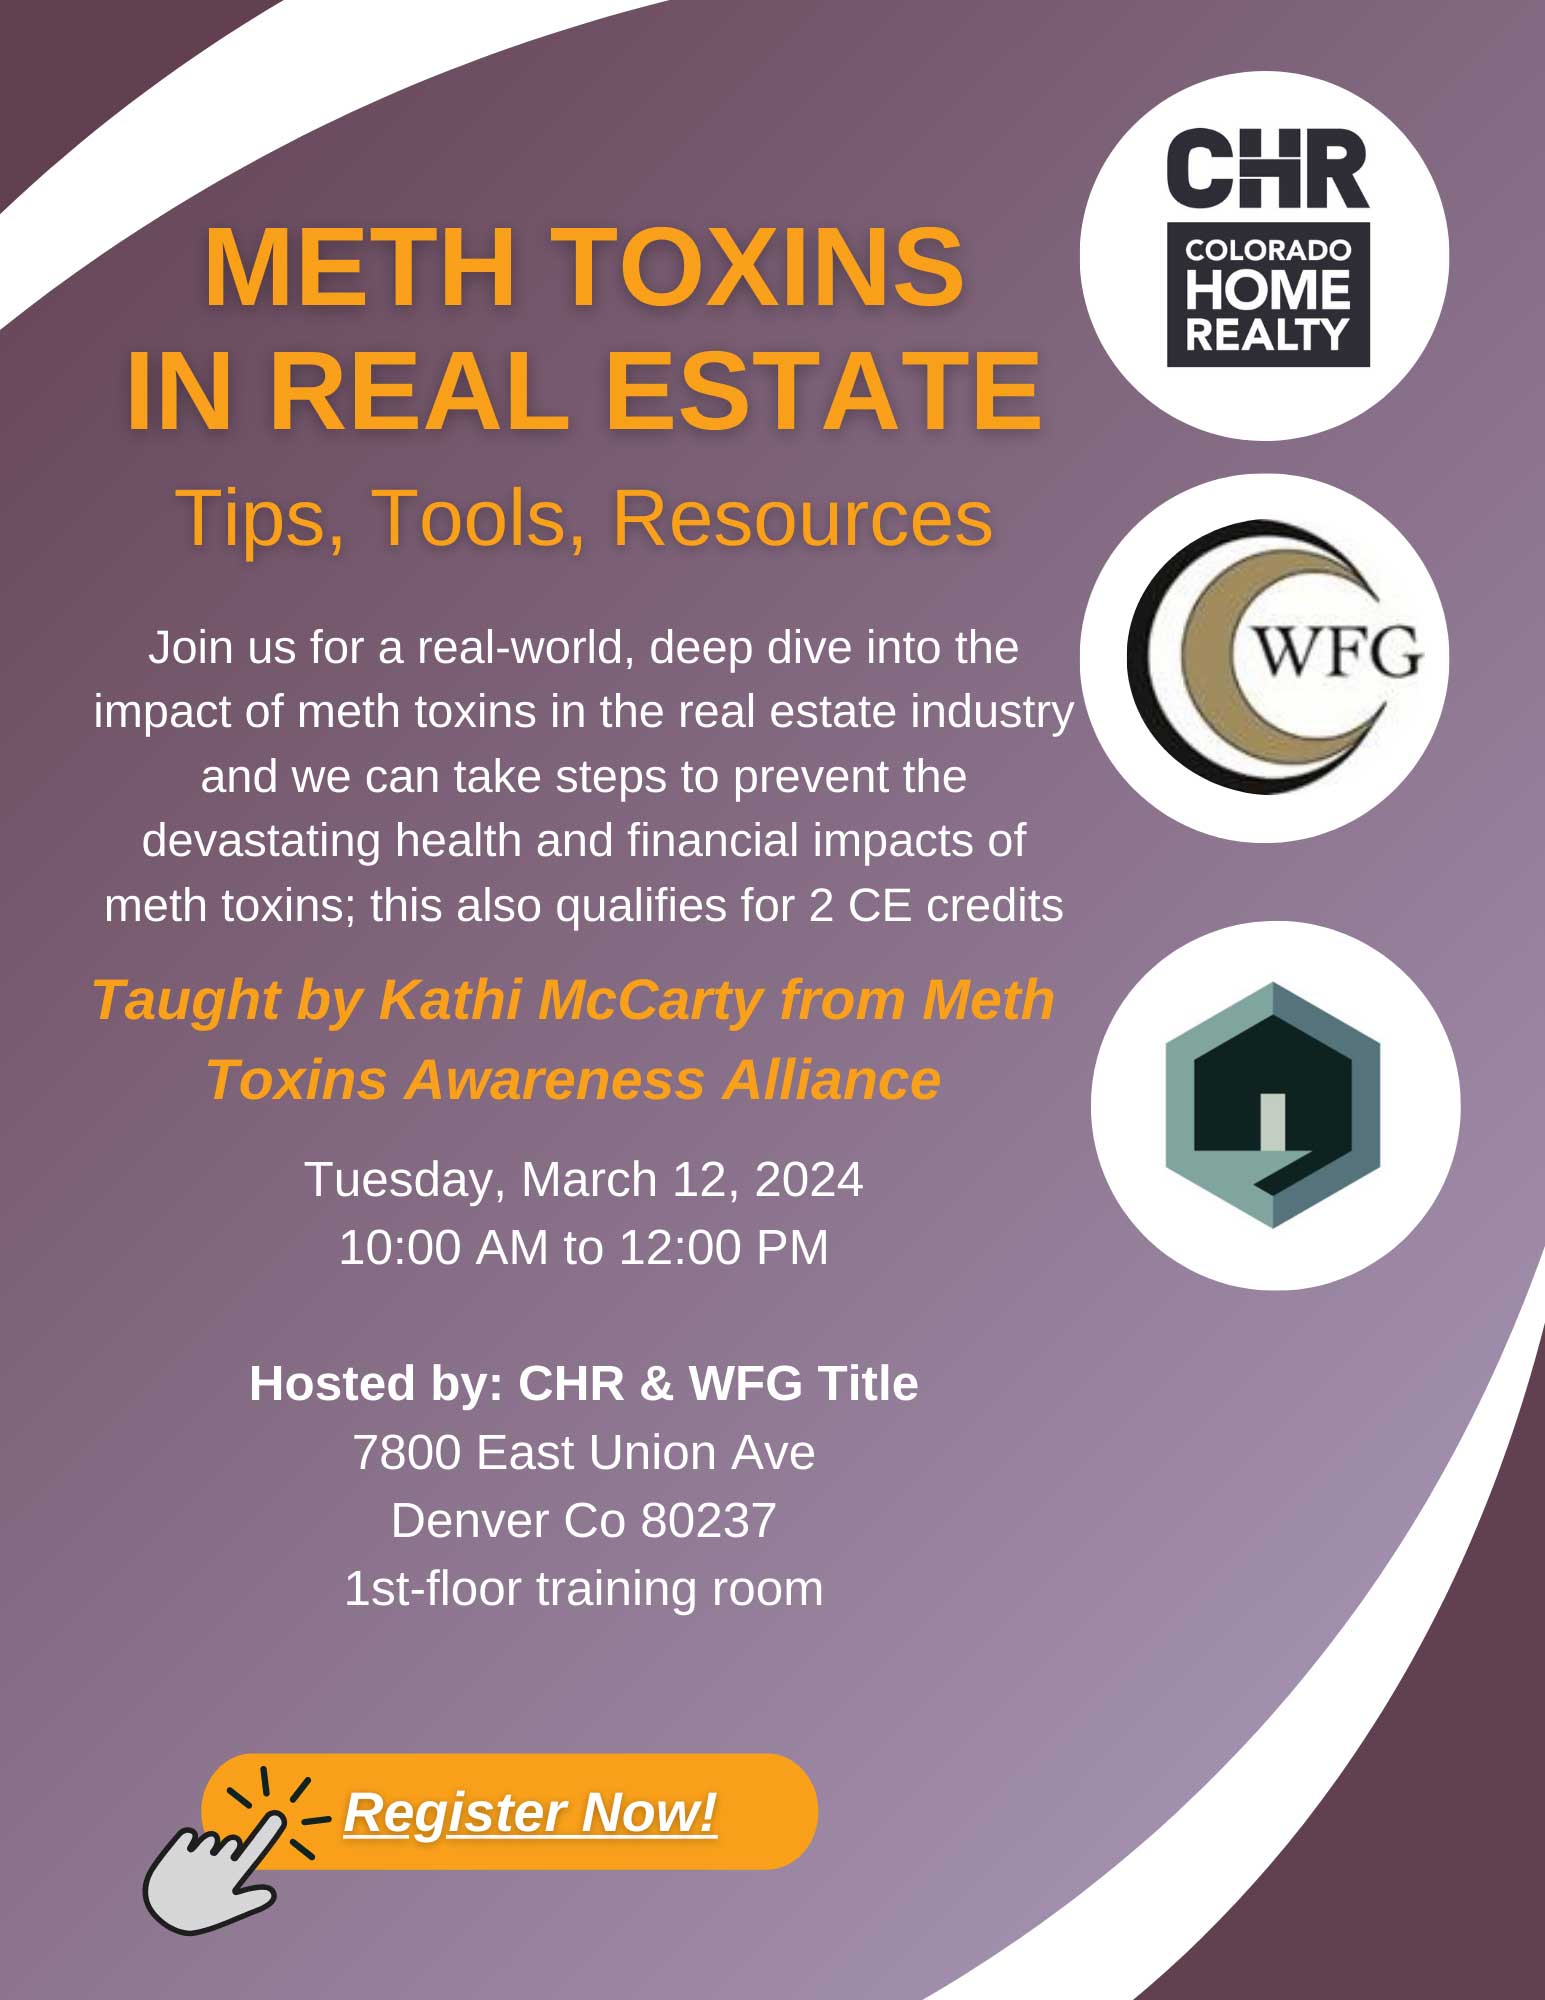 First Integrity Title Company Meth Toxins course